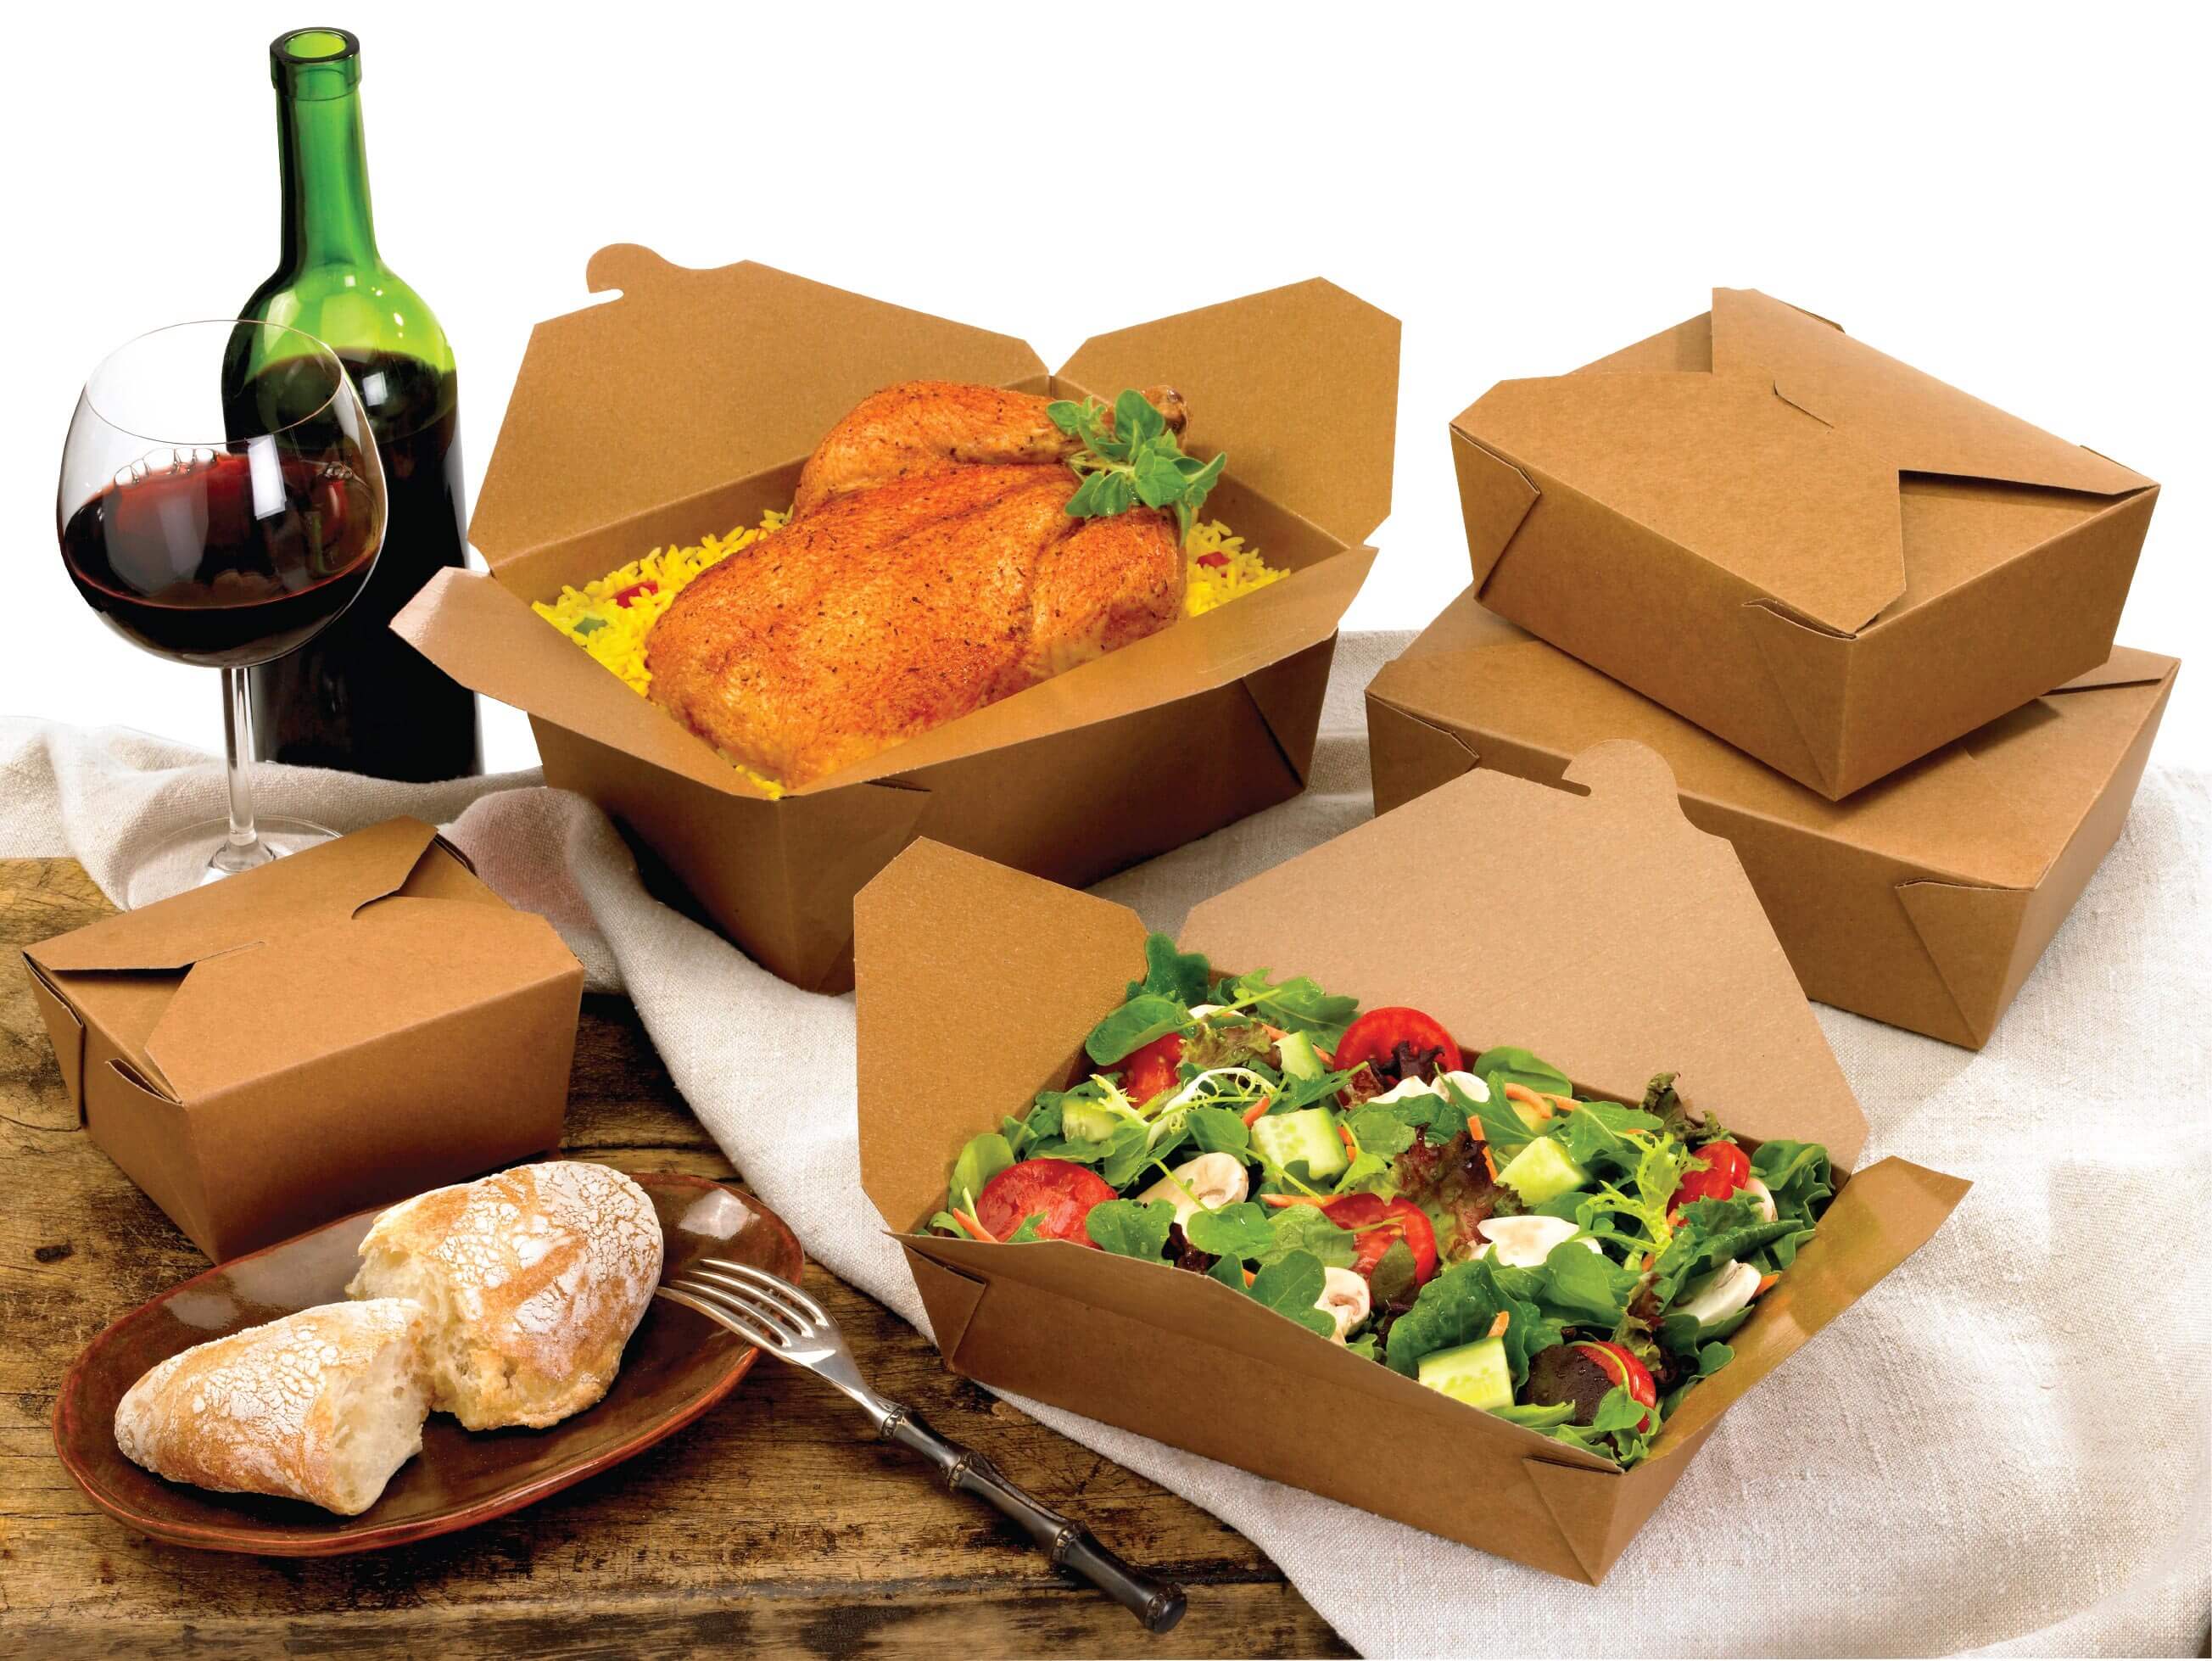 A group shot of Bio-Plus Terra II folding carton containers holding chicken and salad.